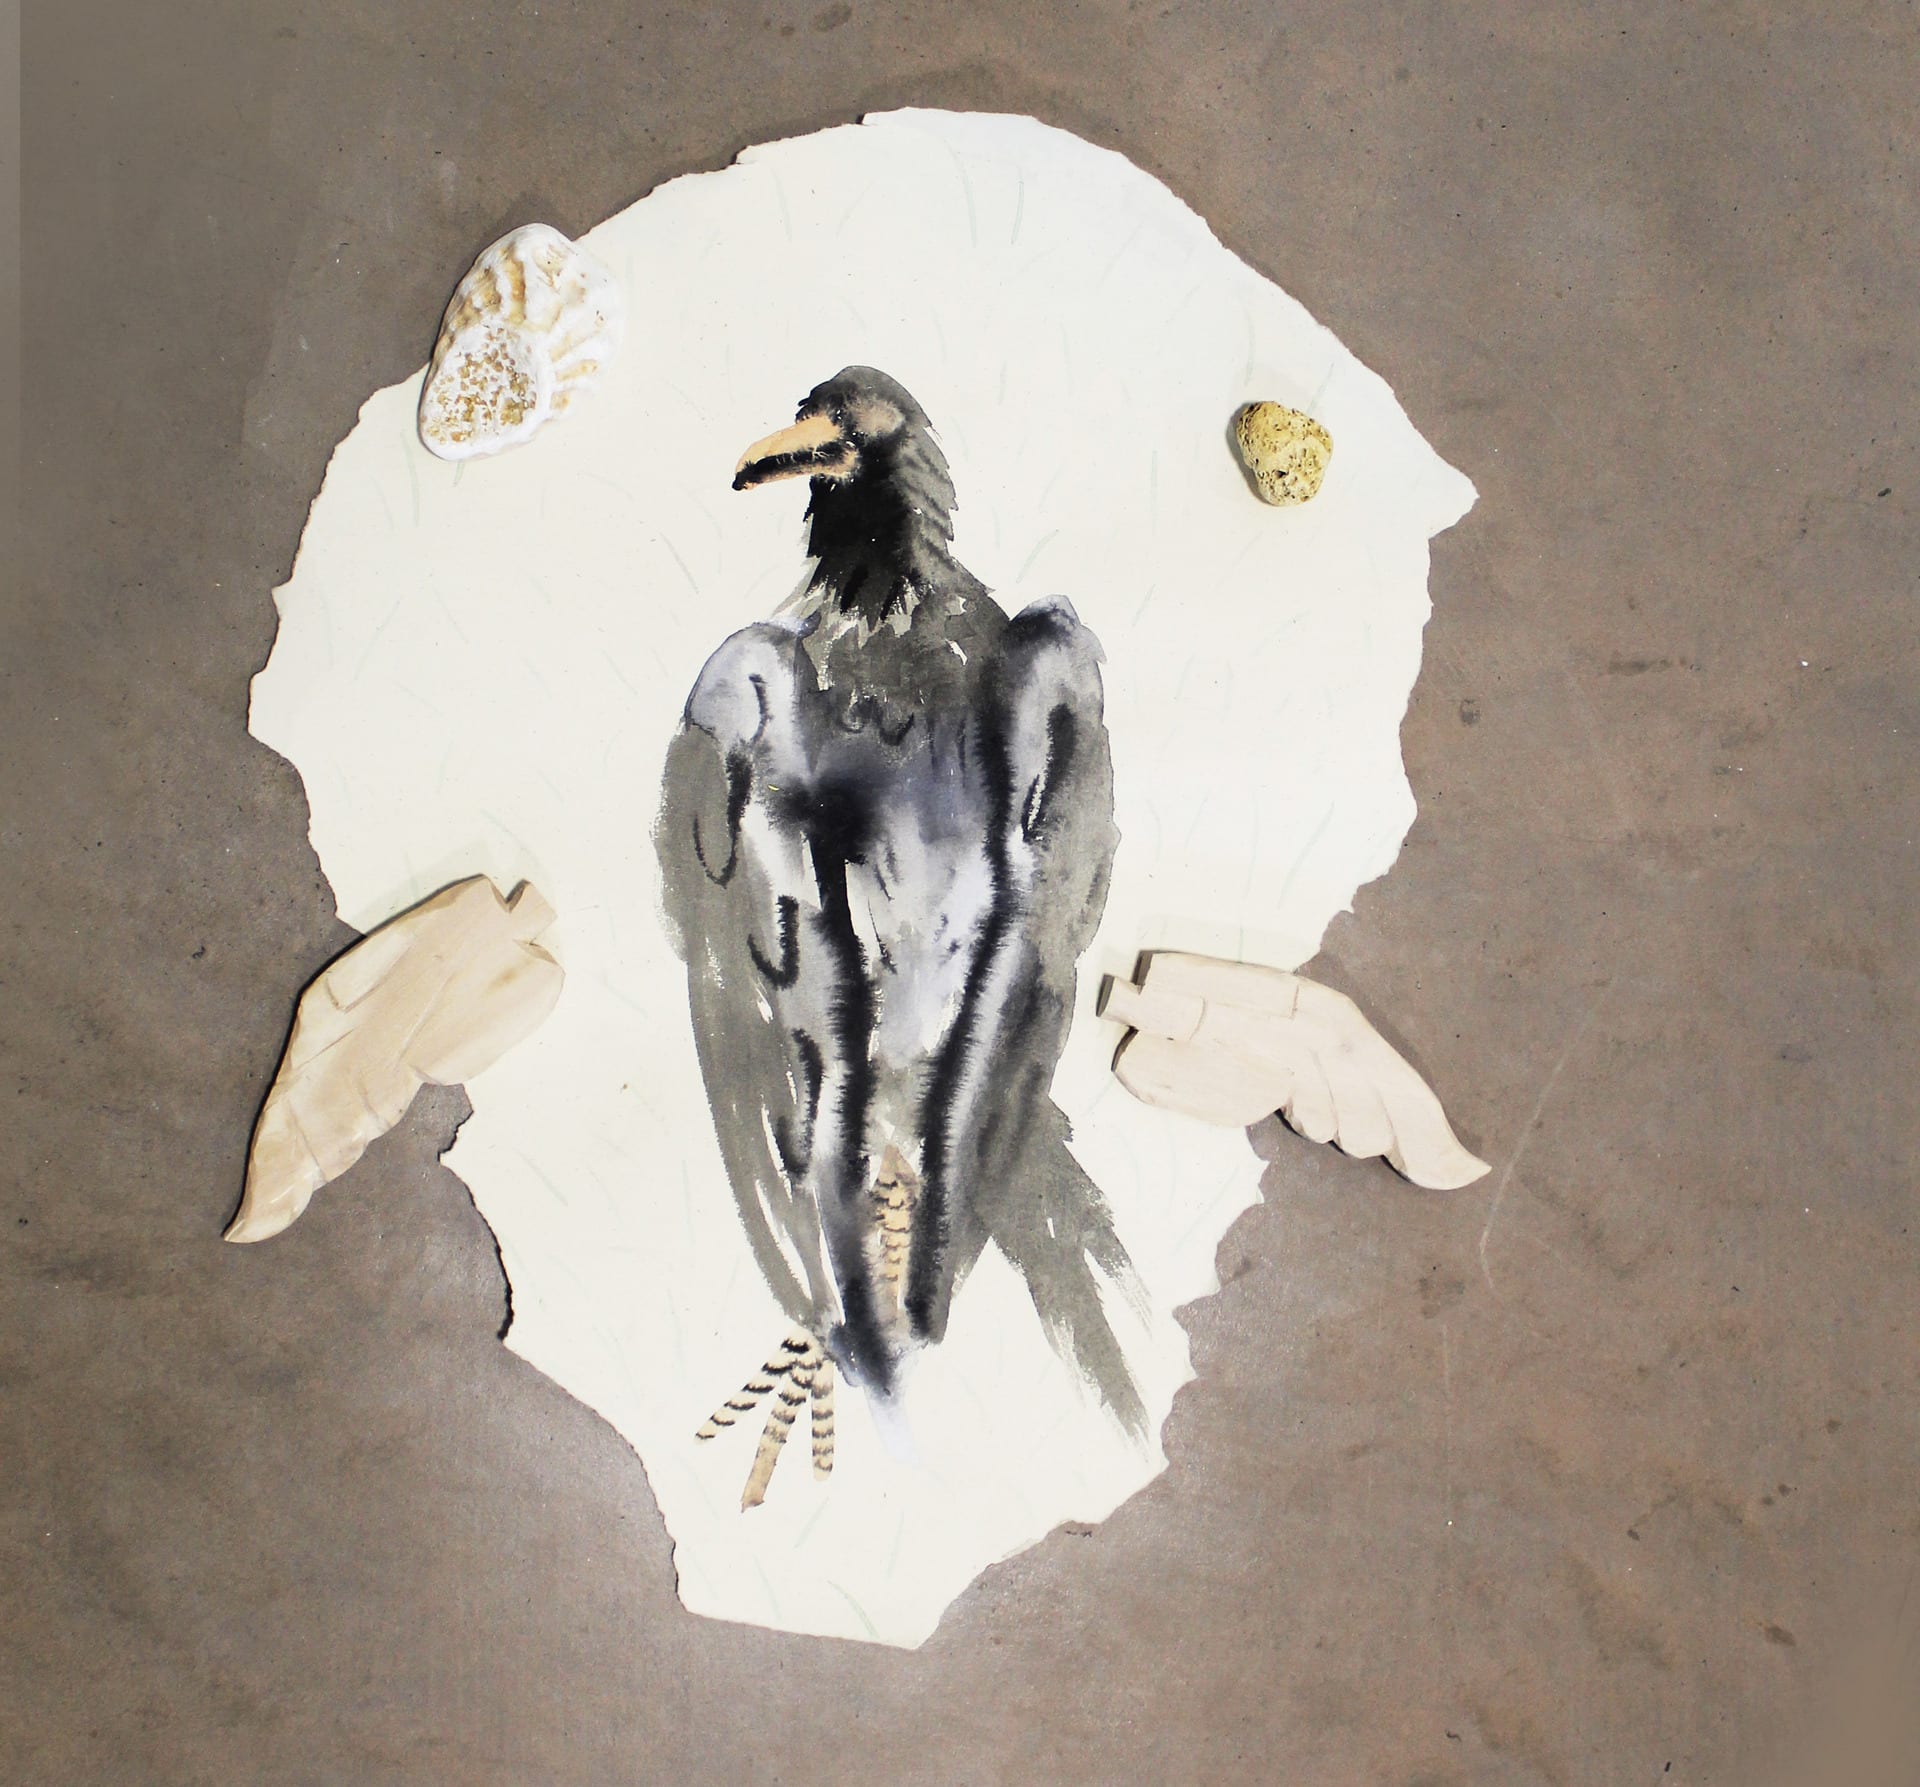 A painting of a dead pigeon is surrounded by wings, shell and stone